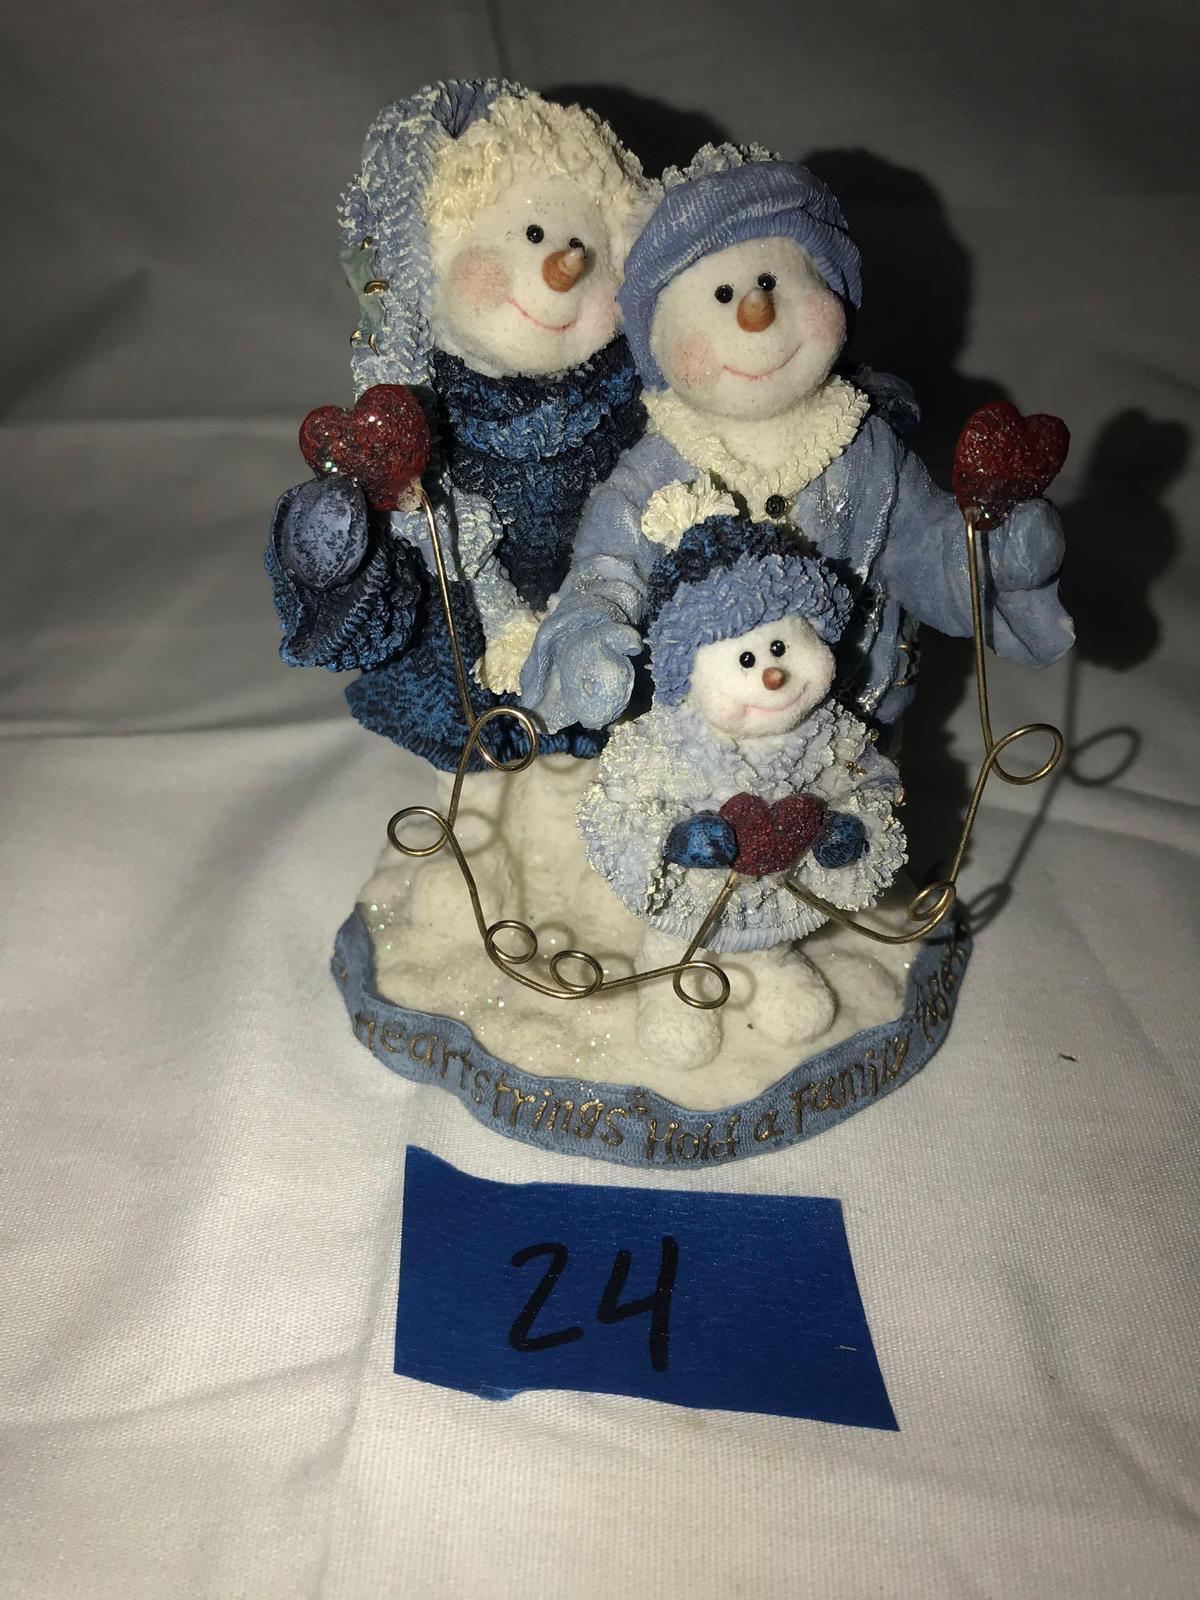 Boyds Bears and friends snow dooodes style number 36523 burry, Furrie and baby Jack